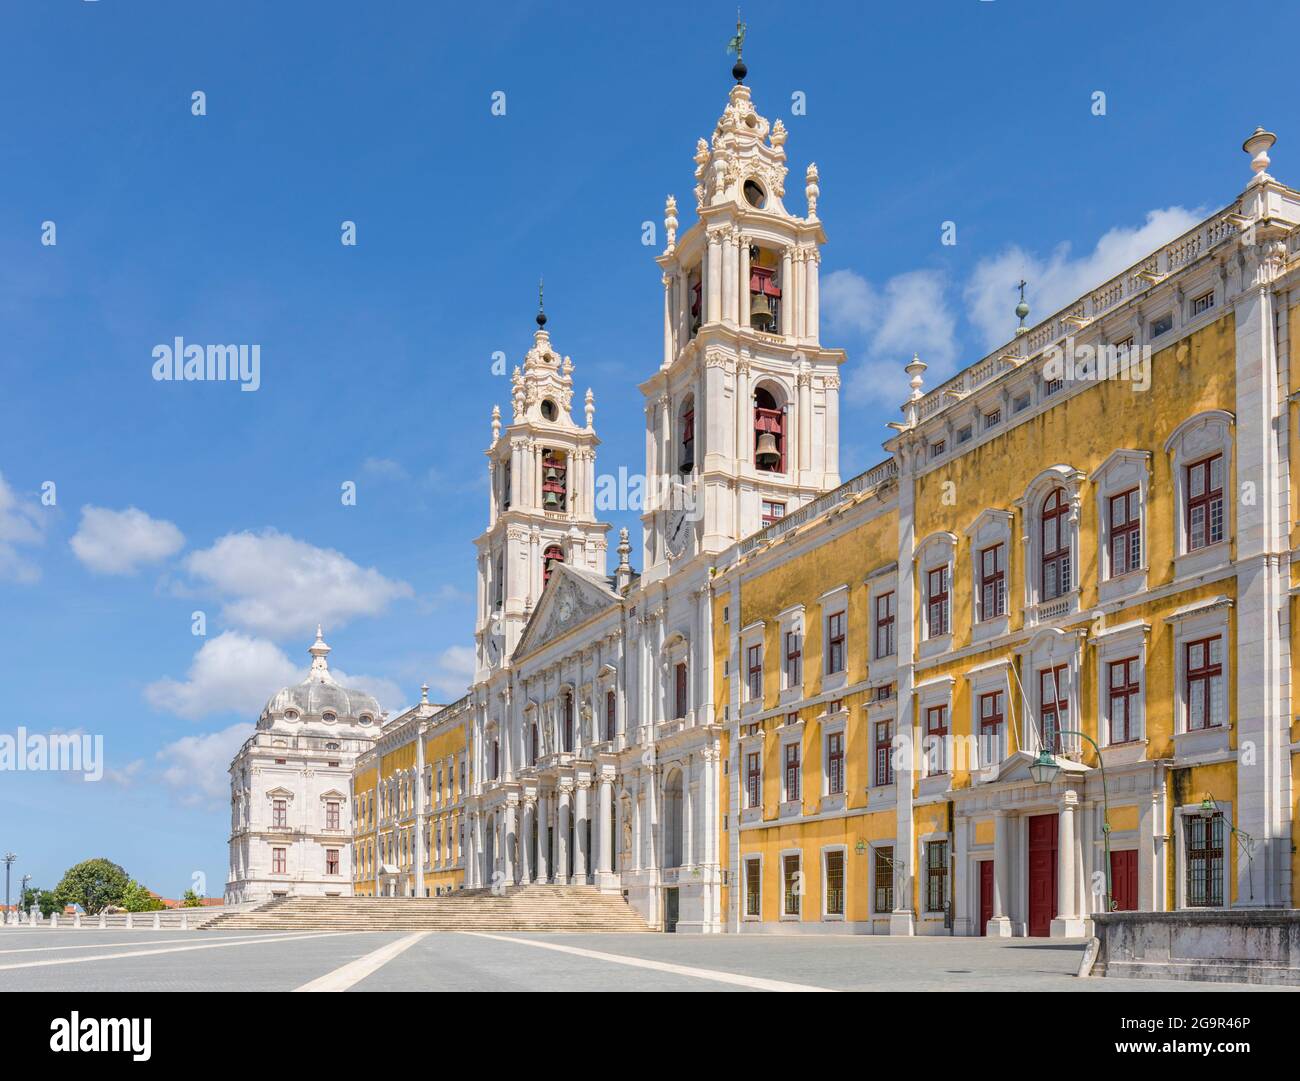 The main facade of The Palace of Mafra, Lisbon district, Portugal.  It is also known as the Palace-Convent of Mafra and the Royal Building of Mafra. Stock Photo